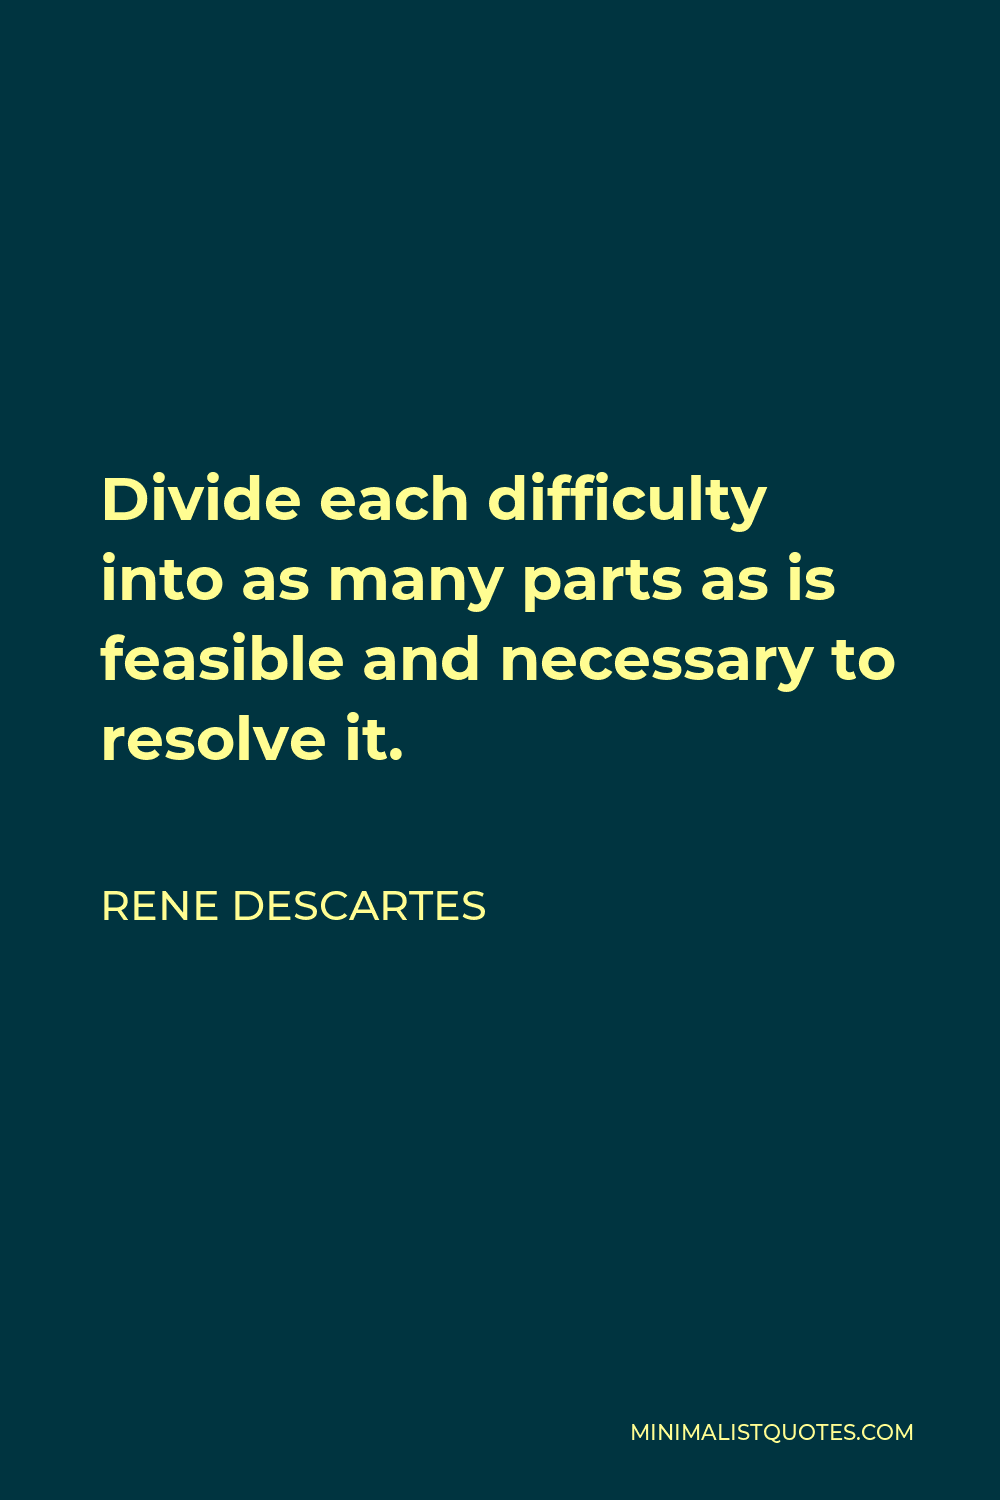 Rene Descartes Quote - Divide each difficulty into as many parts as is feasible and necessary to resolve it.